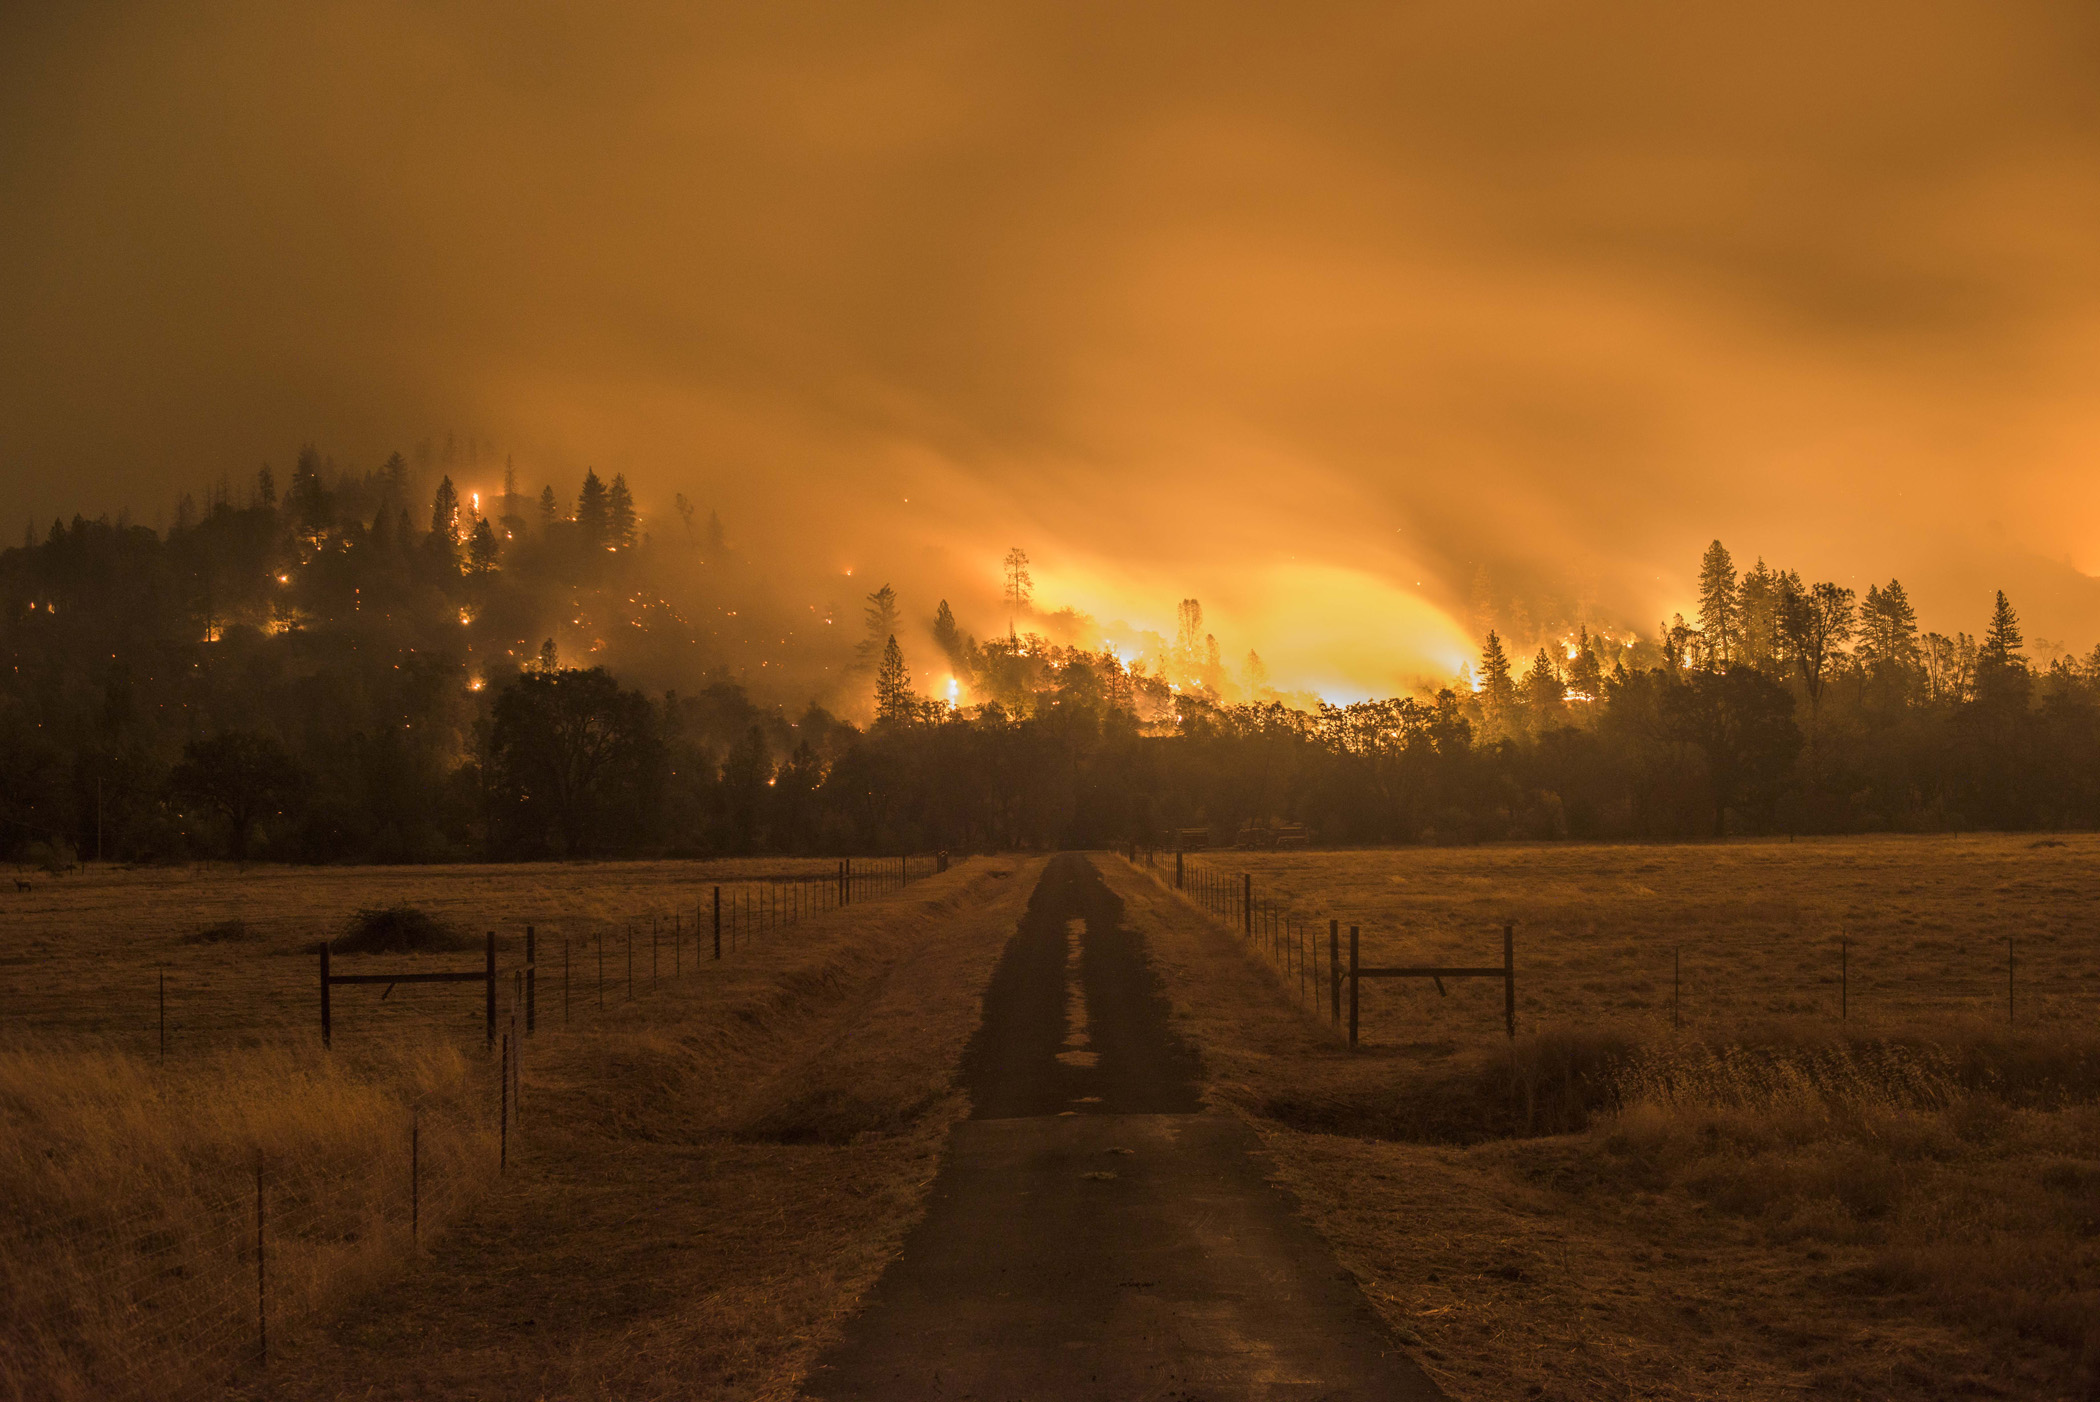 The Valley Fire burns off Highway 29 Sunday evening. Valley Fire in Lake and Sonoma Counties Sunday September 13th, 2015. As of Sunday evening the fire had burned over 50,000 acres and was 0% contained. The Associated Press reported that at least one person was killed due to the fire.